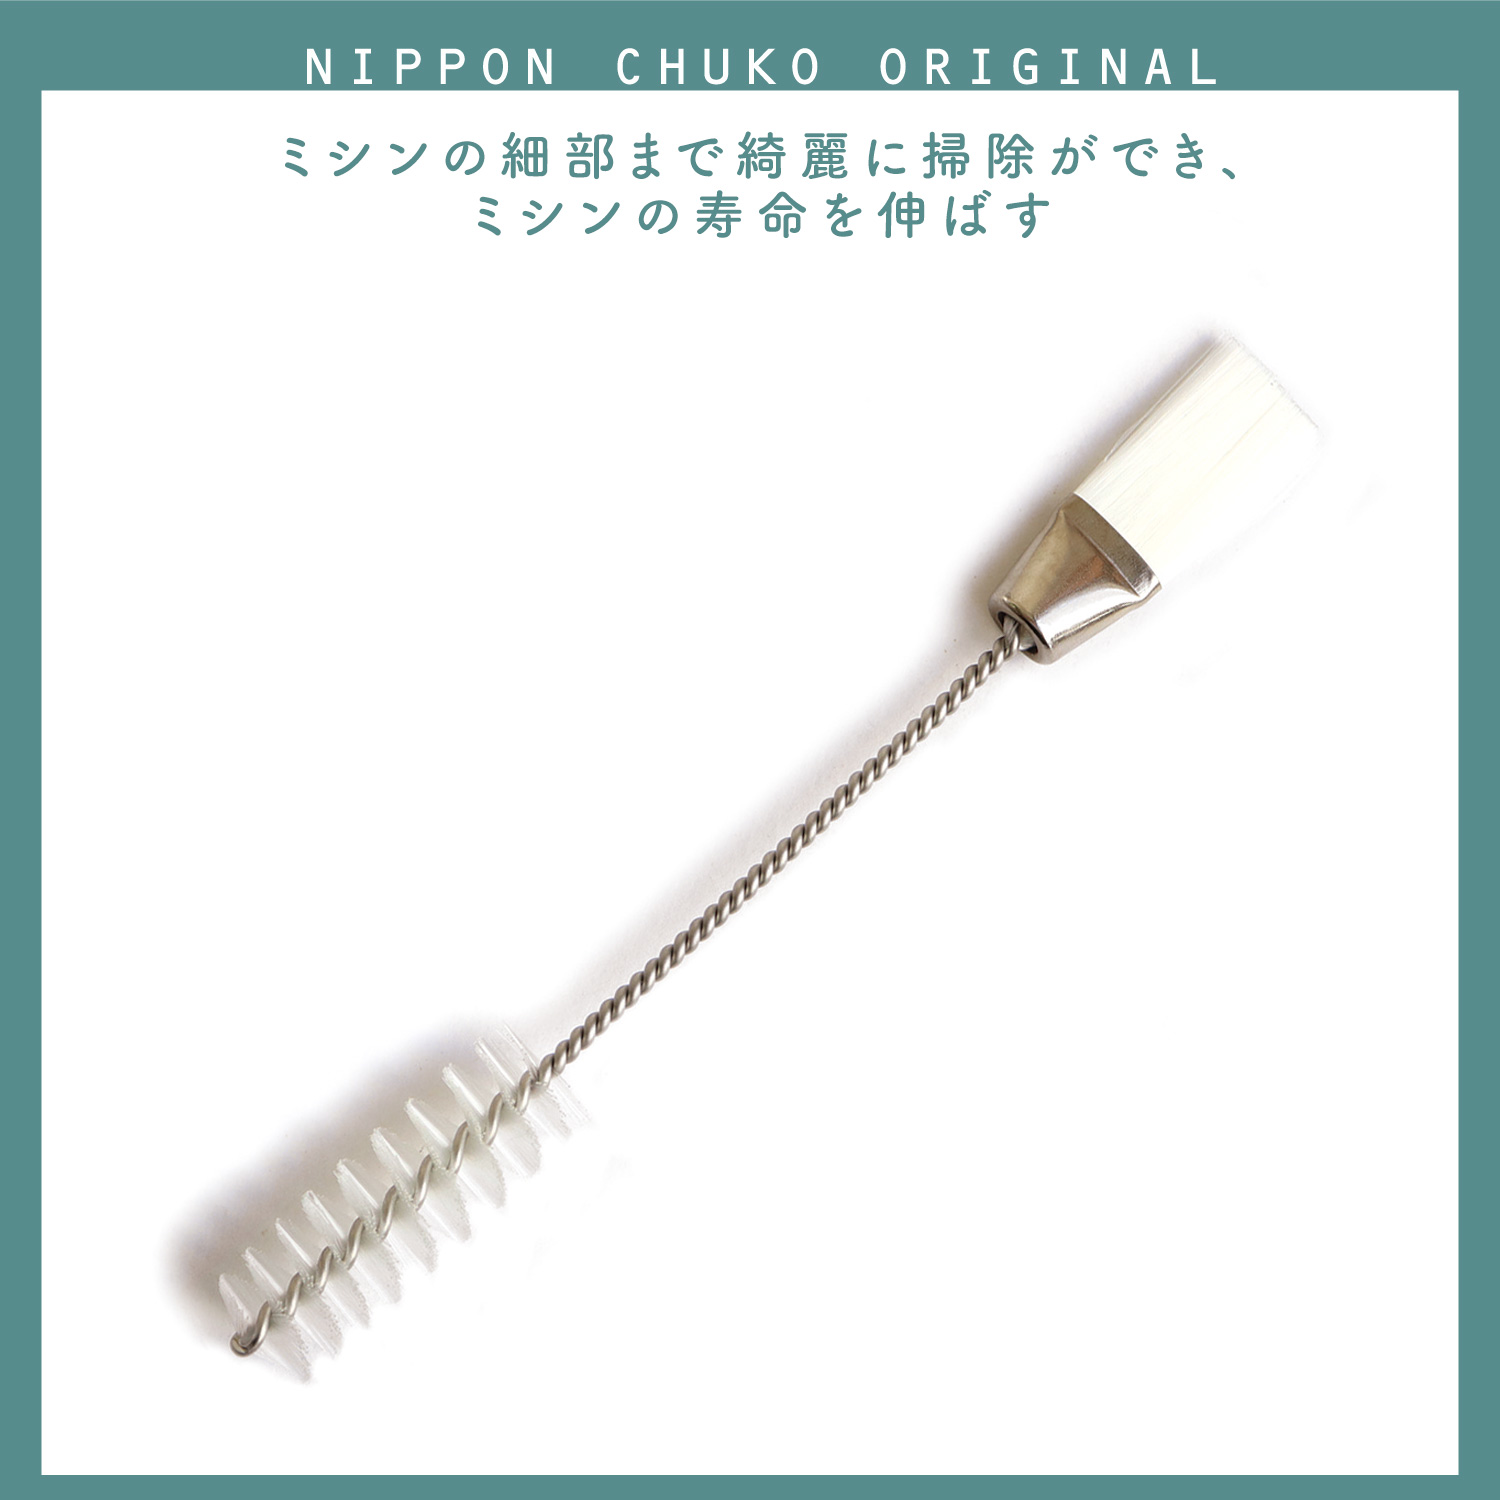 NI-09288 Lint brush for sewing machine approx"",160mm (pcs.)